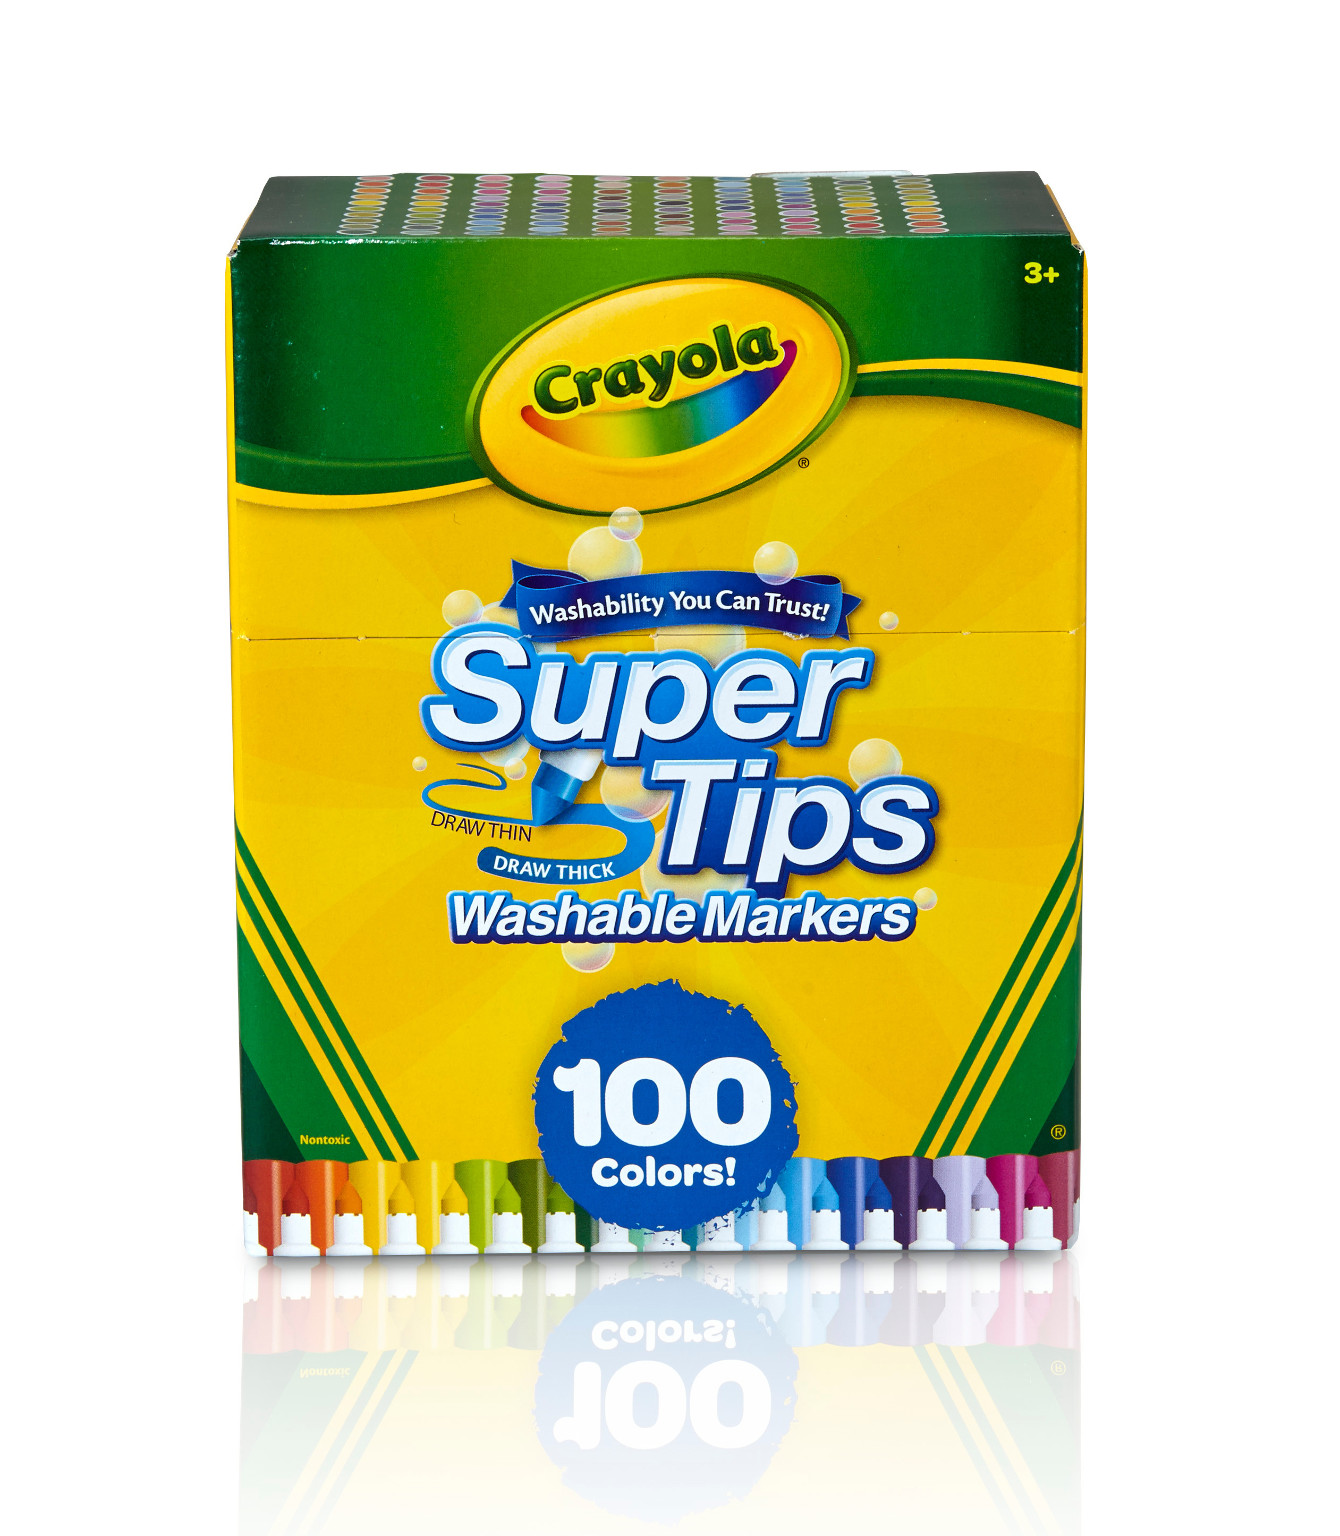 Crayola Markers - 100 Super Tip Colors, Washable